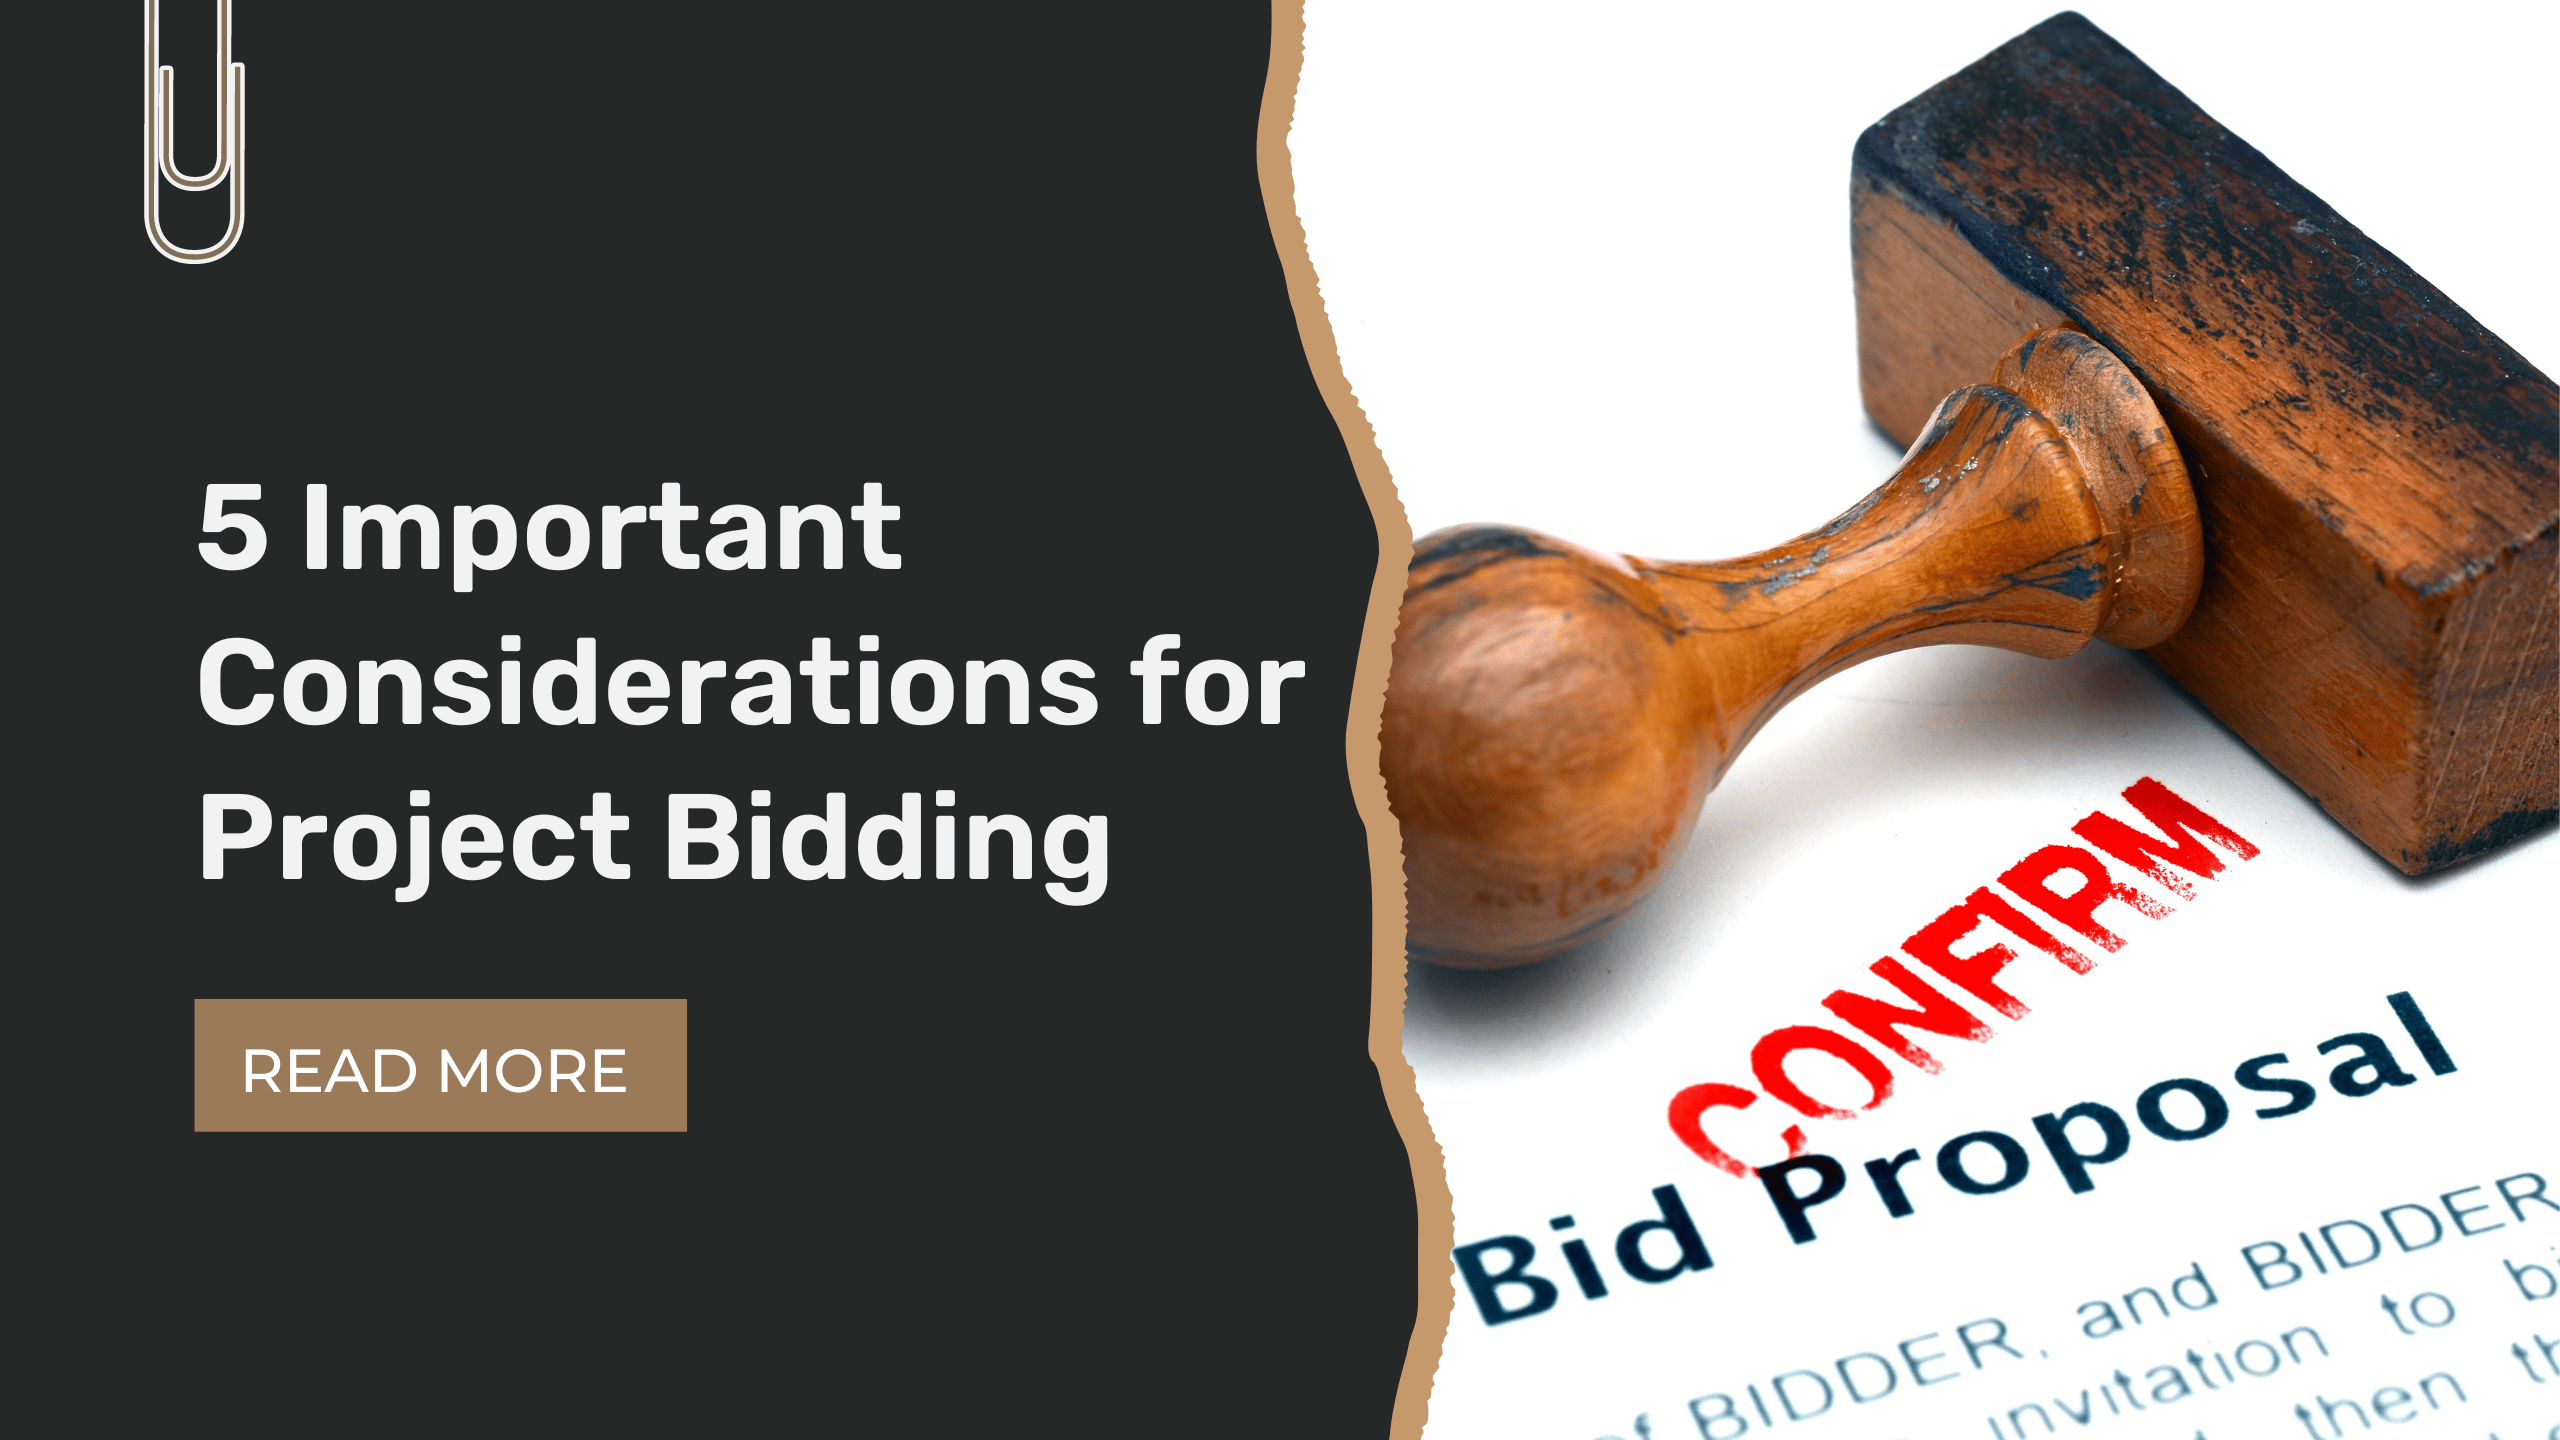 5 Important Considerations for Project Bidding